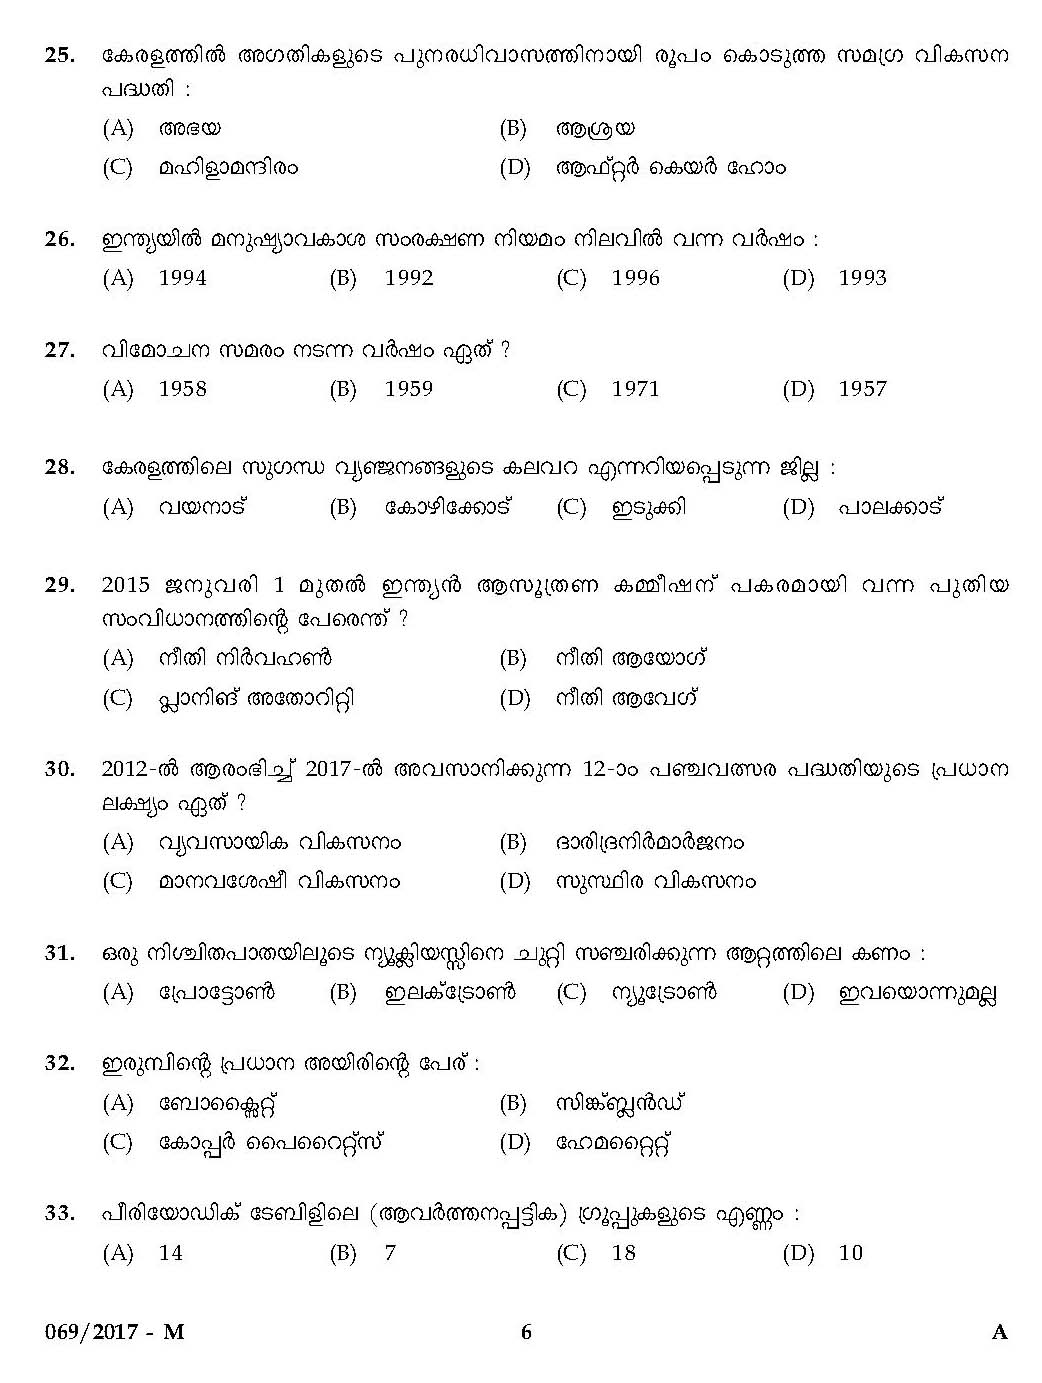 LD Clerk Question Paper 2017 Malayalam Paper Code 0692017 M 5